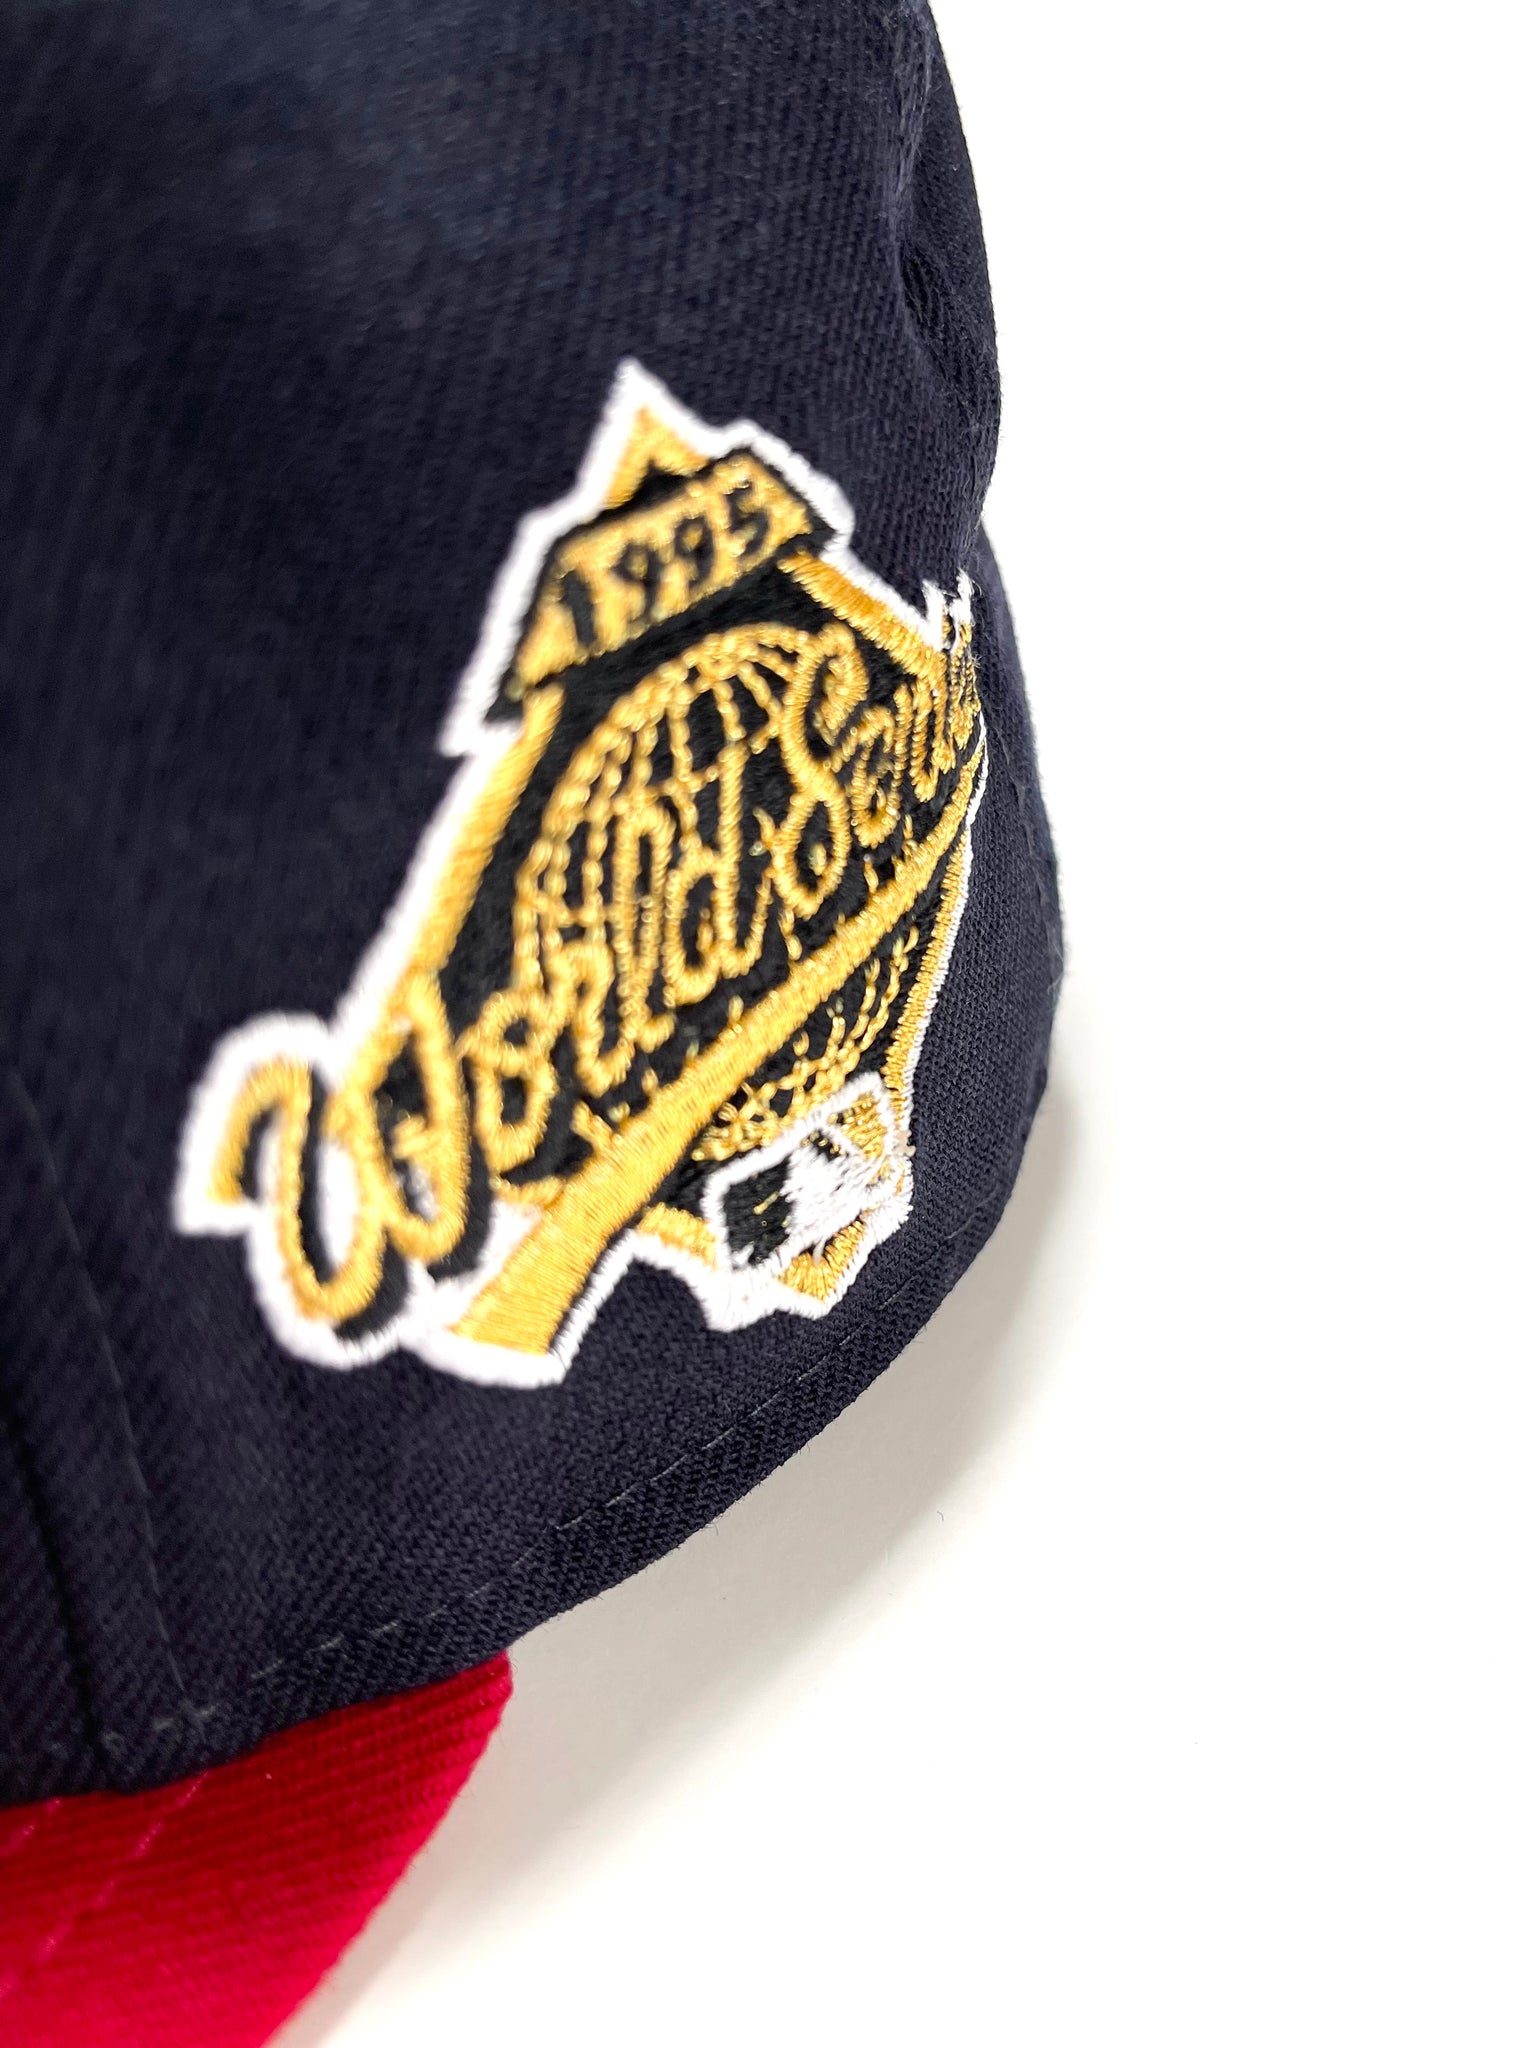 NEW ERA 1995 WS SIDE PATCH ATLANTA BRAVES FITTED HAT (NAVY/RED) – So  Fresh Clothing